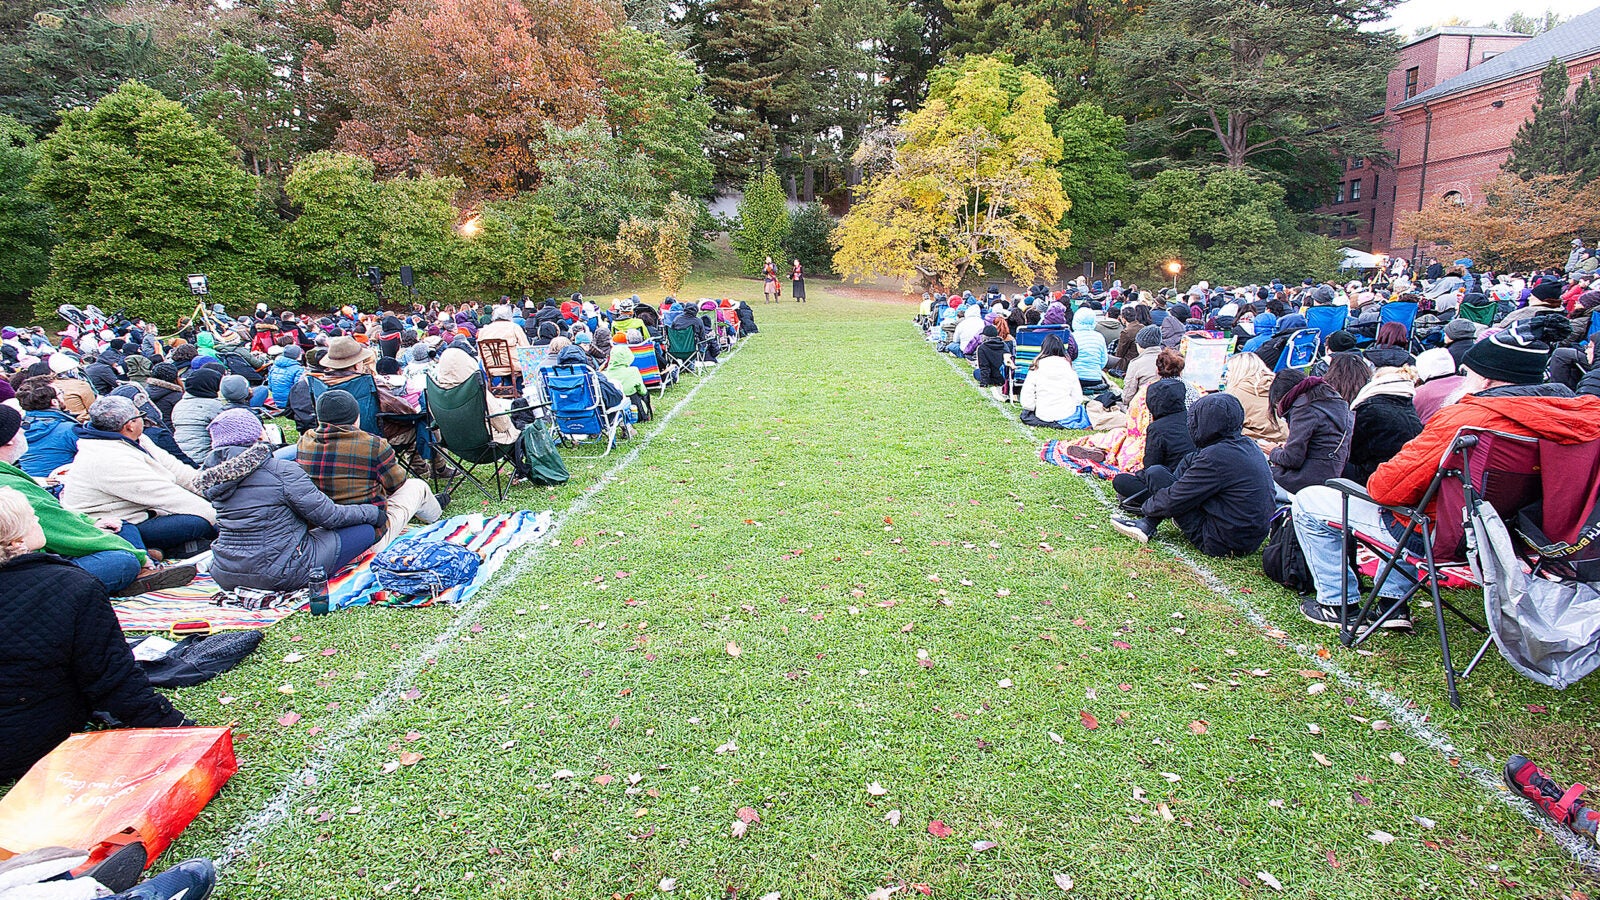 An audience watching Macbeth from the grass